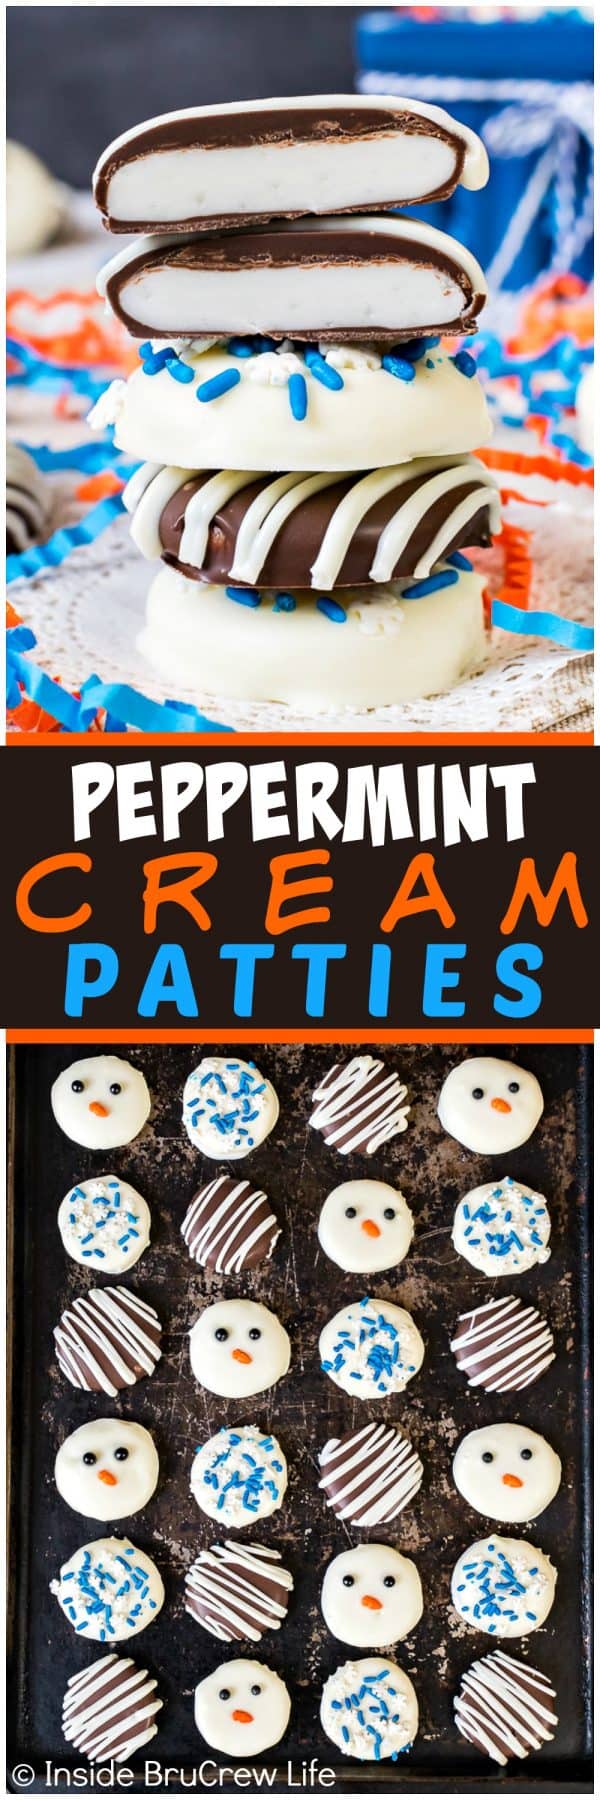 Two pictures of peppermint cream patties collaged together with a black text box.